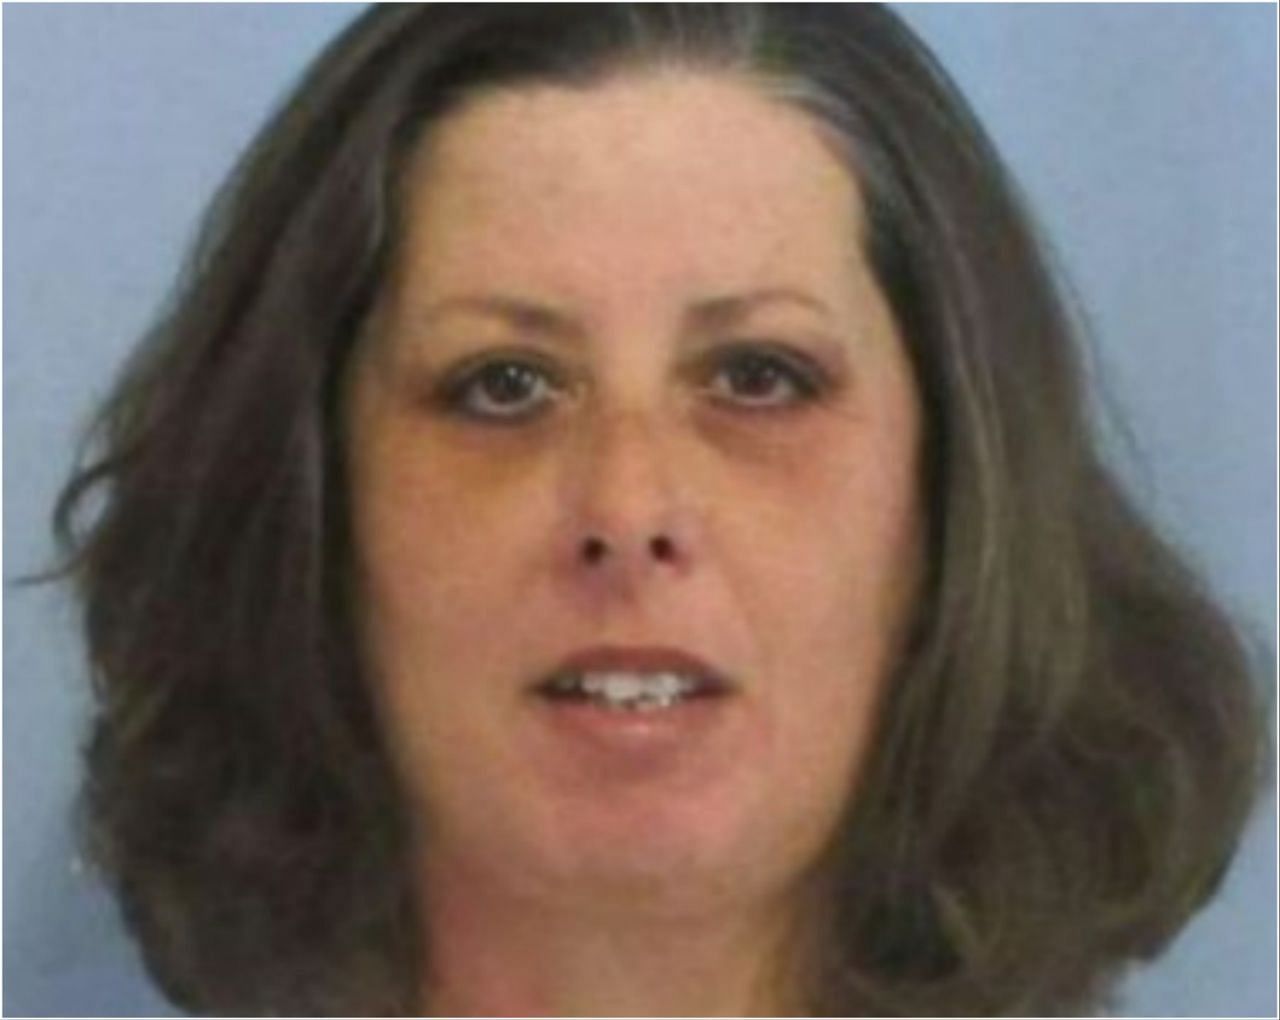 59-year-old Neelley was denied parole for the second time (Image via Alabama Department of Corrections)